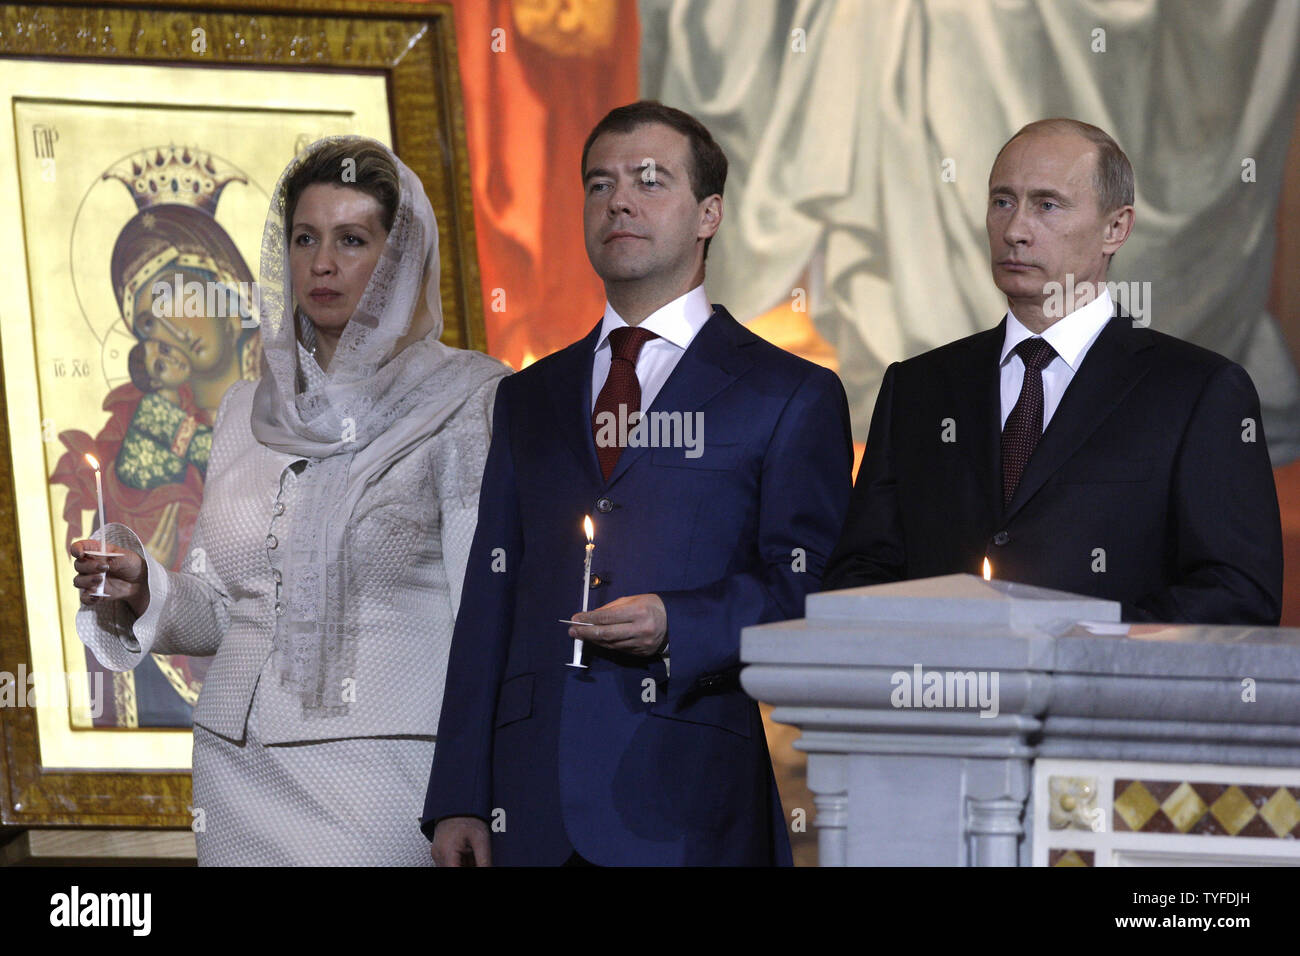 Russian President Dmitry Medvedev C With His Wife Svetlana And Prime Minister Vladimir Putin Stand During